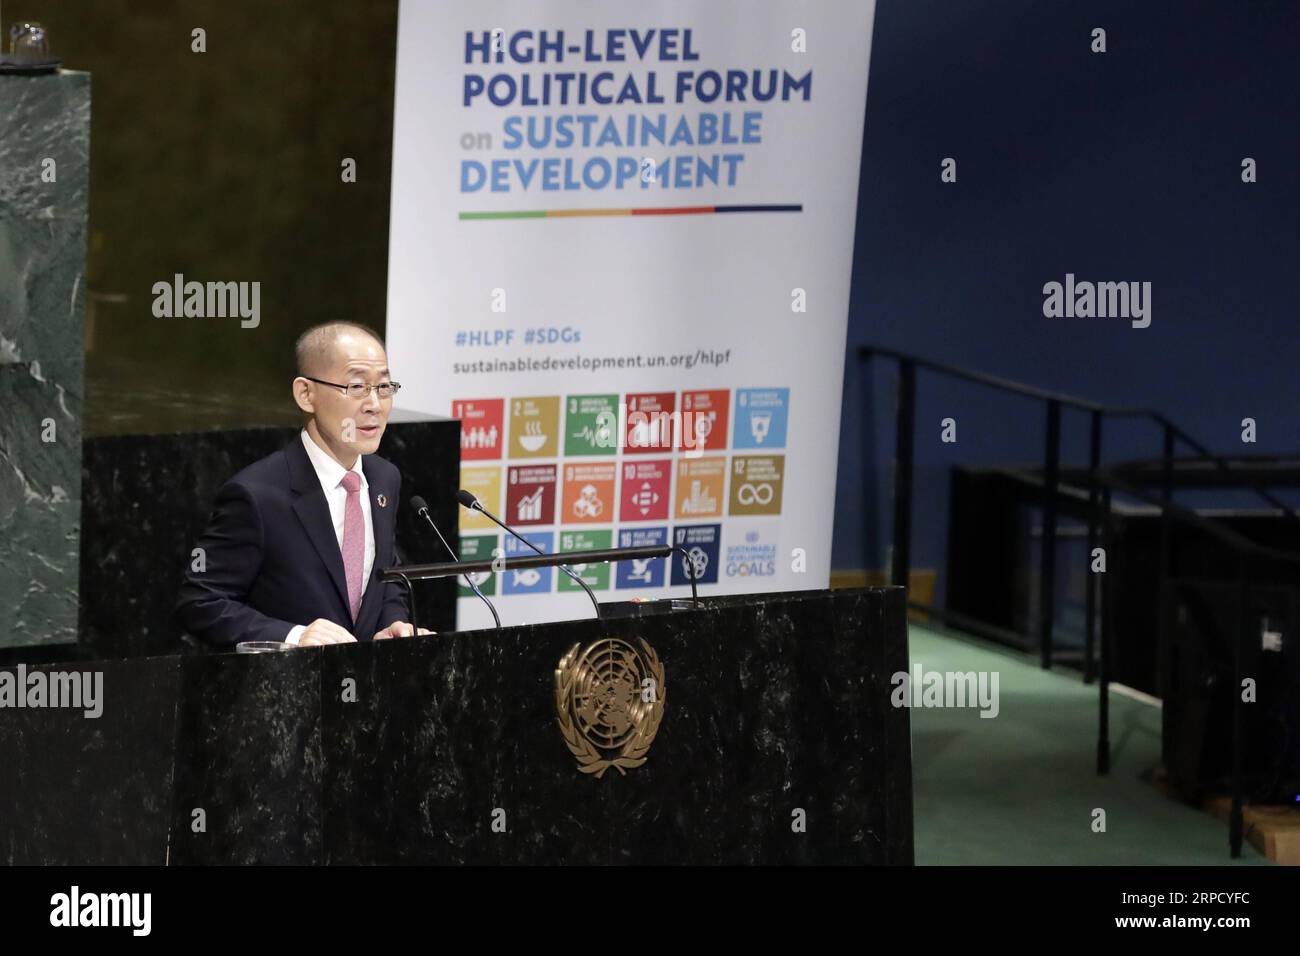 (190716) -- UNITED NATIONS, July 16, 2019 -- Hoesung Lee, Chair of the Intergovernmental Panel on Climate Change (IPCC), addresses the opening ceremony of the High-level Segment of the Economic and Social Council (ECOSOC) Ministerial Segment of the High-level Political Forum on Sustainable Development at the UN headquarters in New York, July 16, 2019. United Nations Secretary-General Antonio Guterres said Tuesday that shifting to a greener economy could create 24 million jobs globally by 2030. ) UN-ECOSOC-HIGH-LEVEL POLITICAL FORUM-SUSTAINABLE DEVELOPMENT LixMuzi PUBLICATIONxNOTxINxCHN Stock Photo